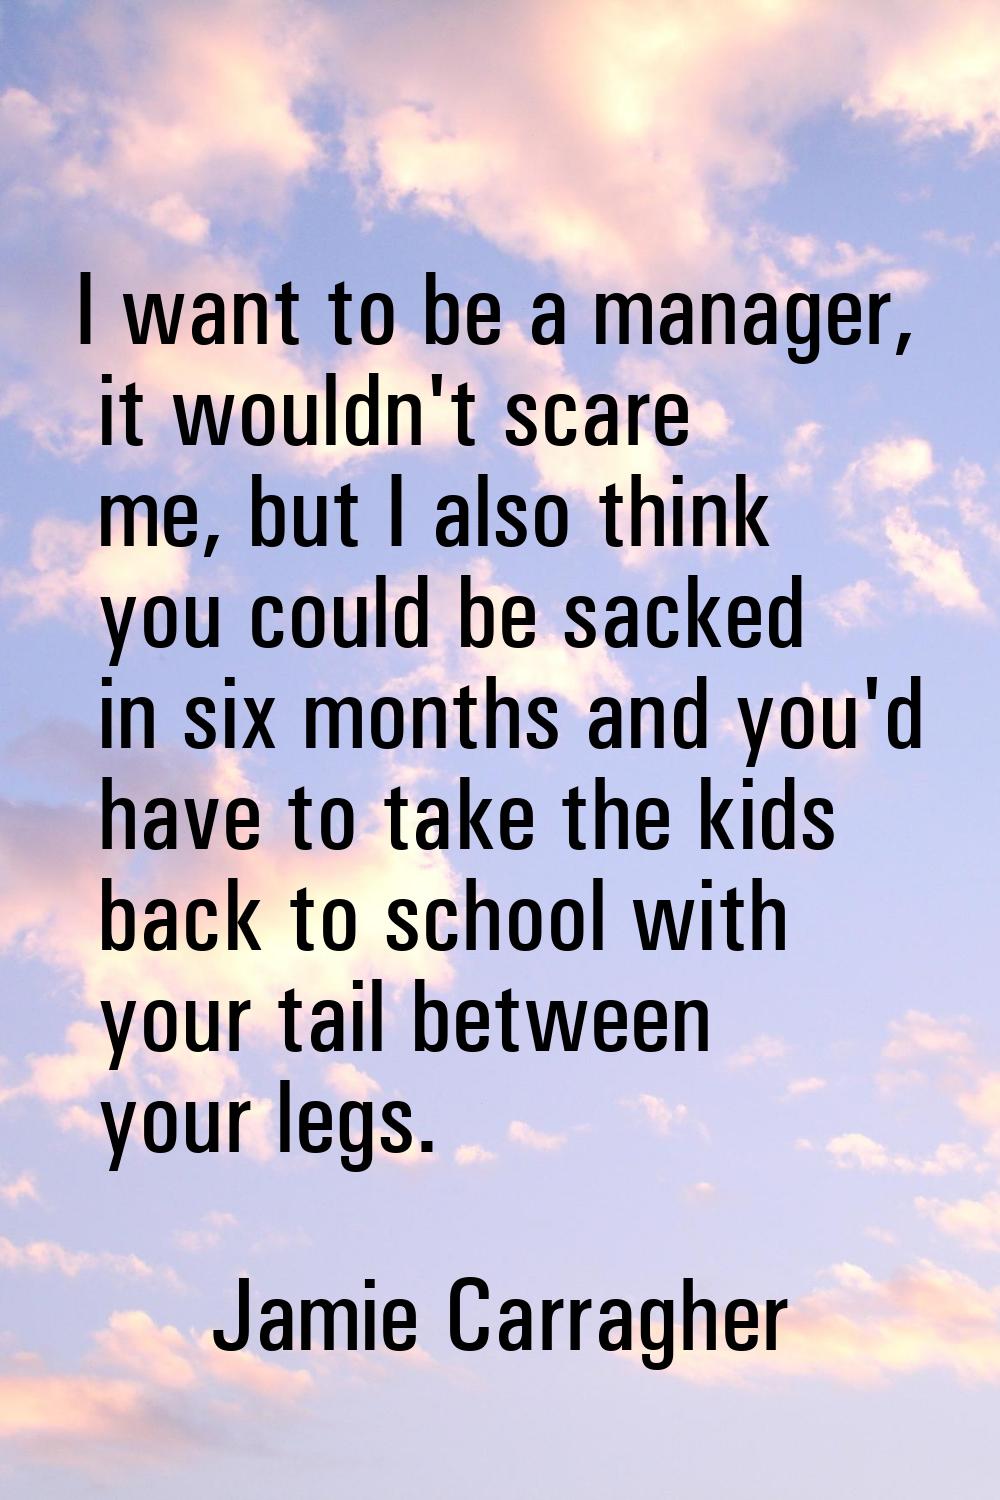 I want to be a manager, it wouldn't scare me, but I also think you could be sacked in six months an